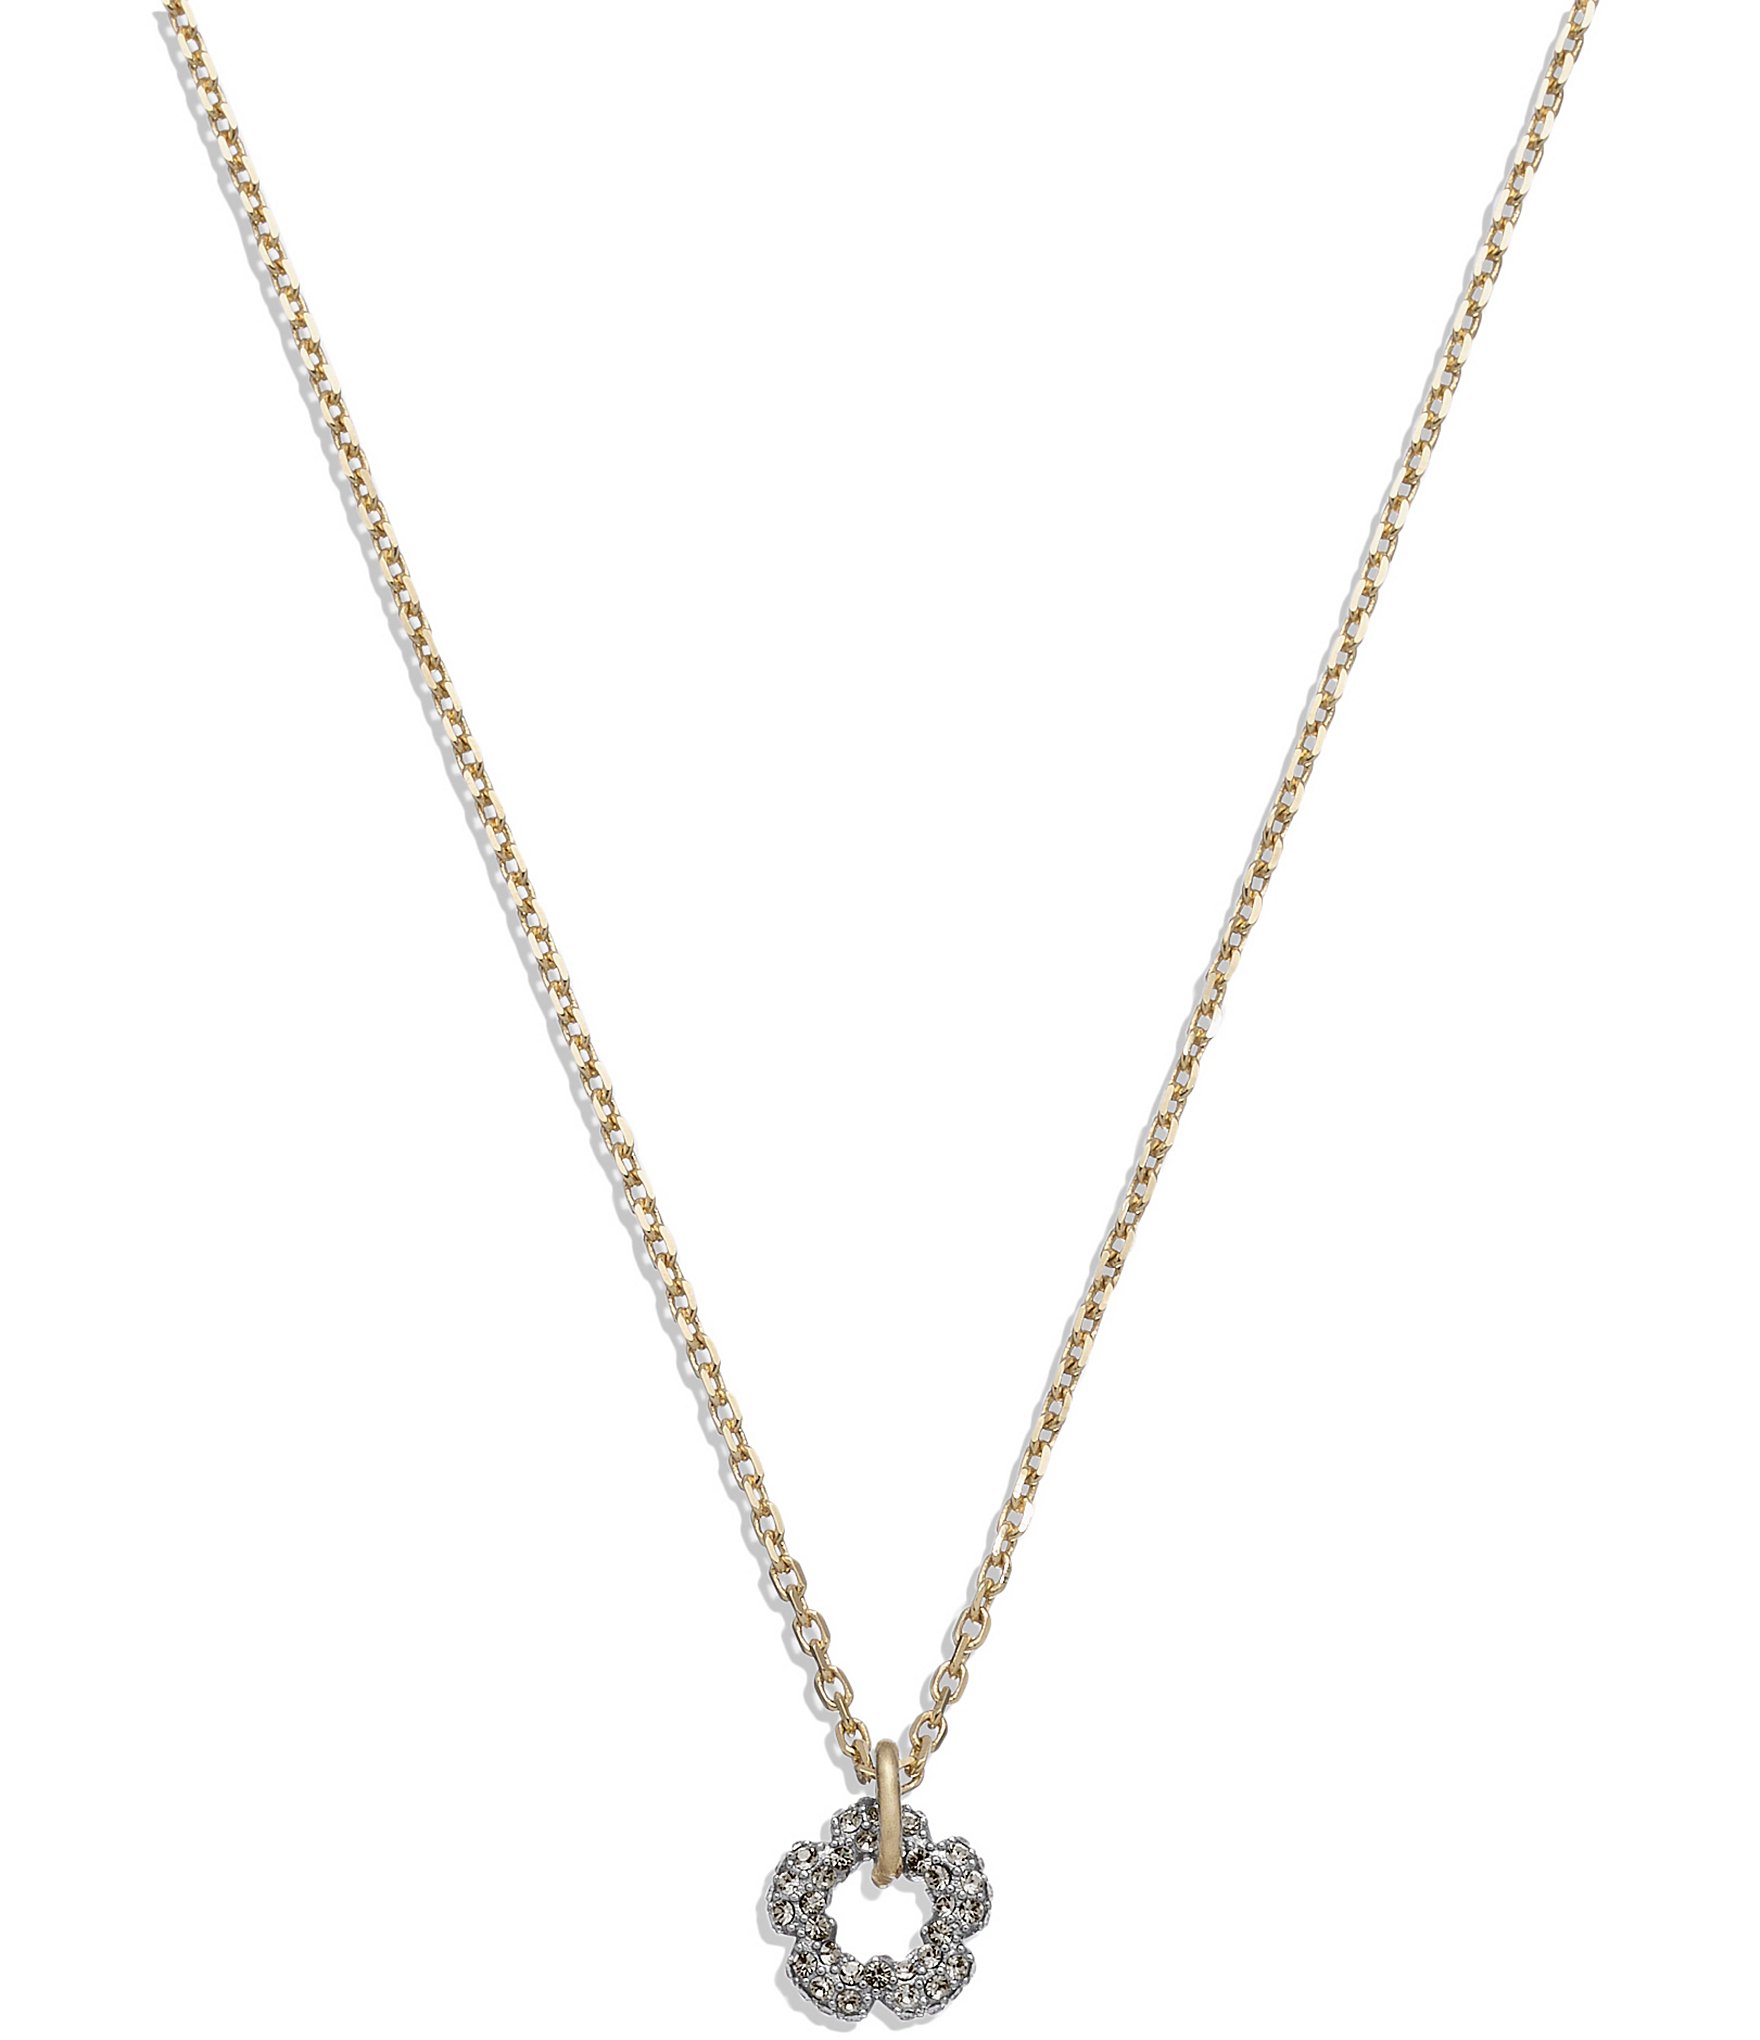 Coach Crystal Halo Pendant Necklace, 16 + 2 extender